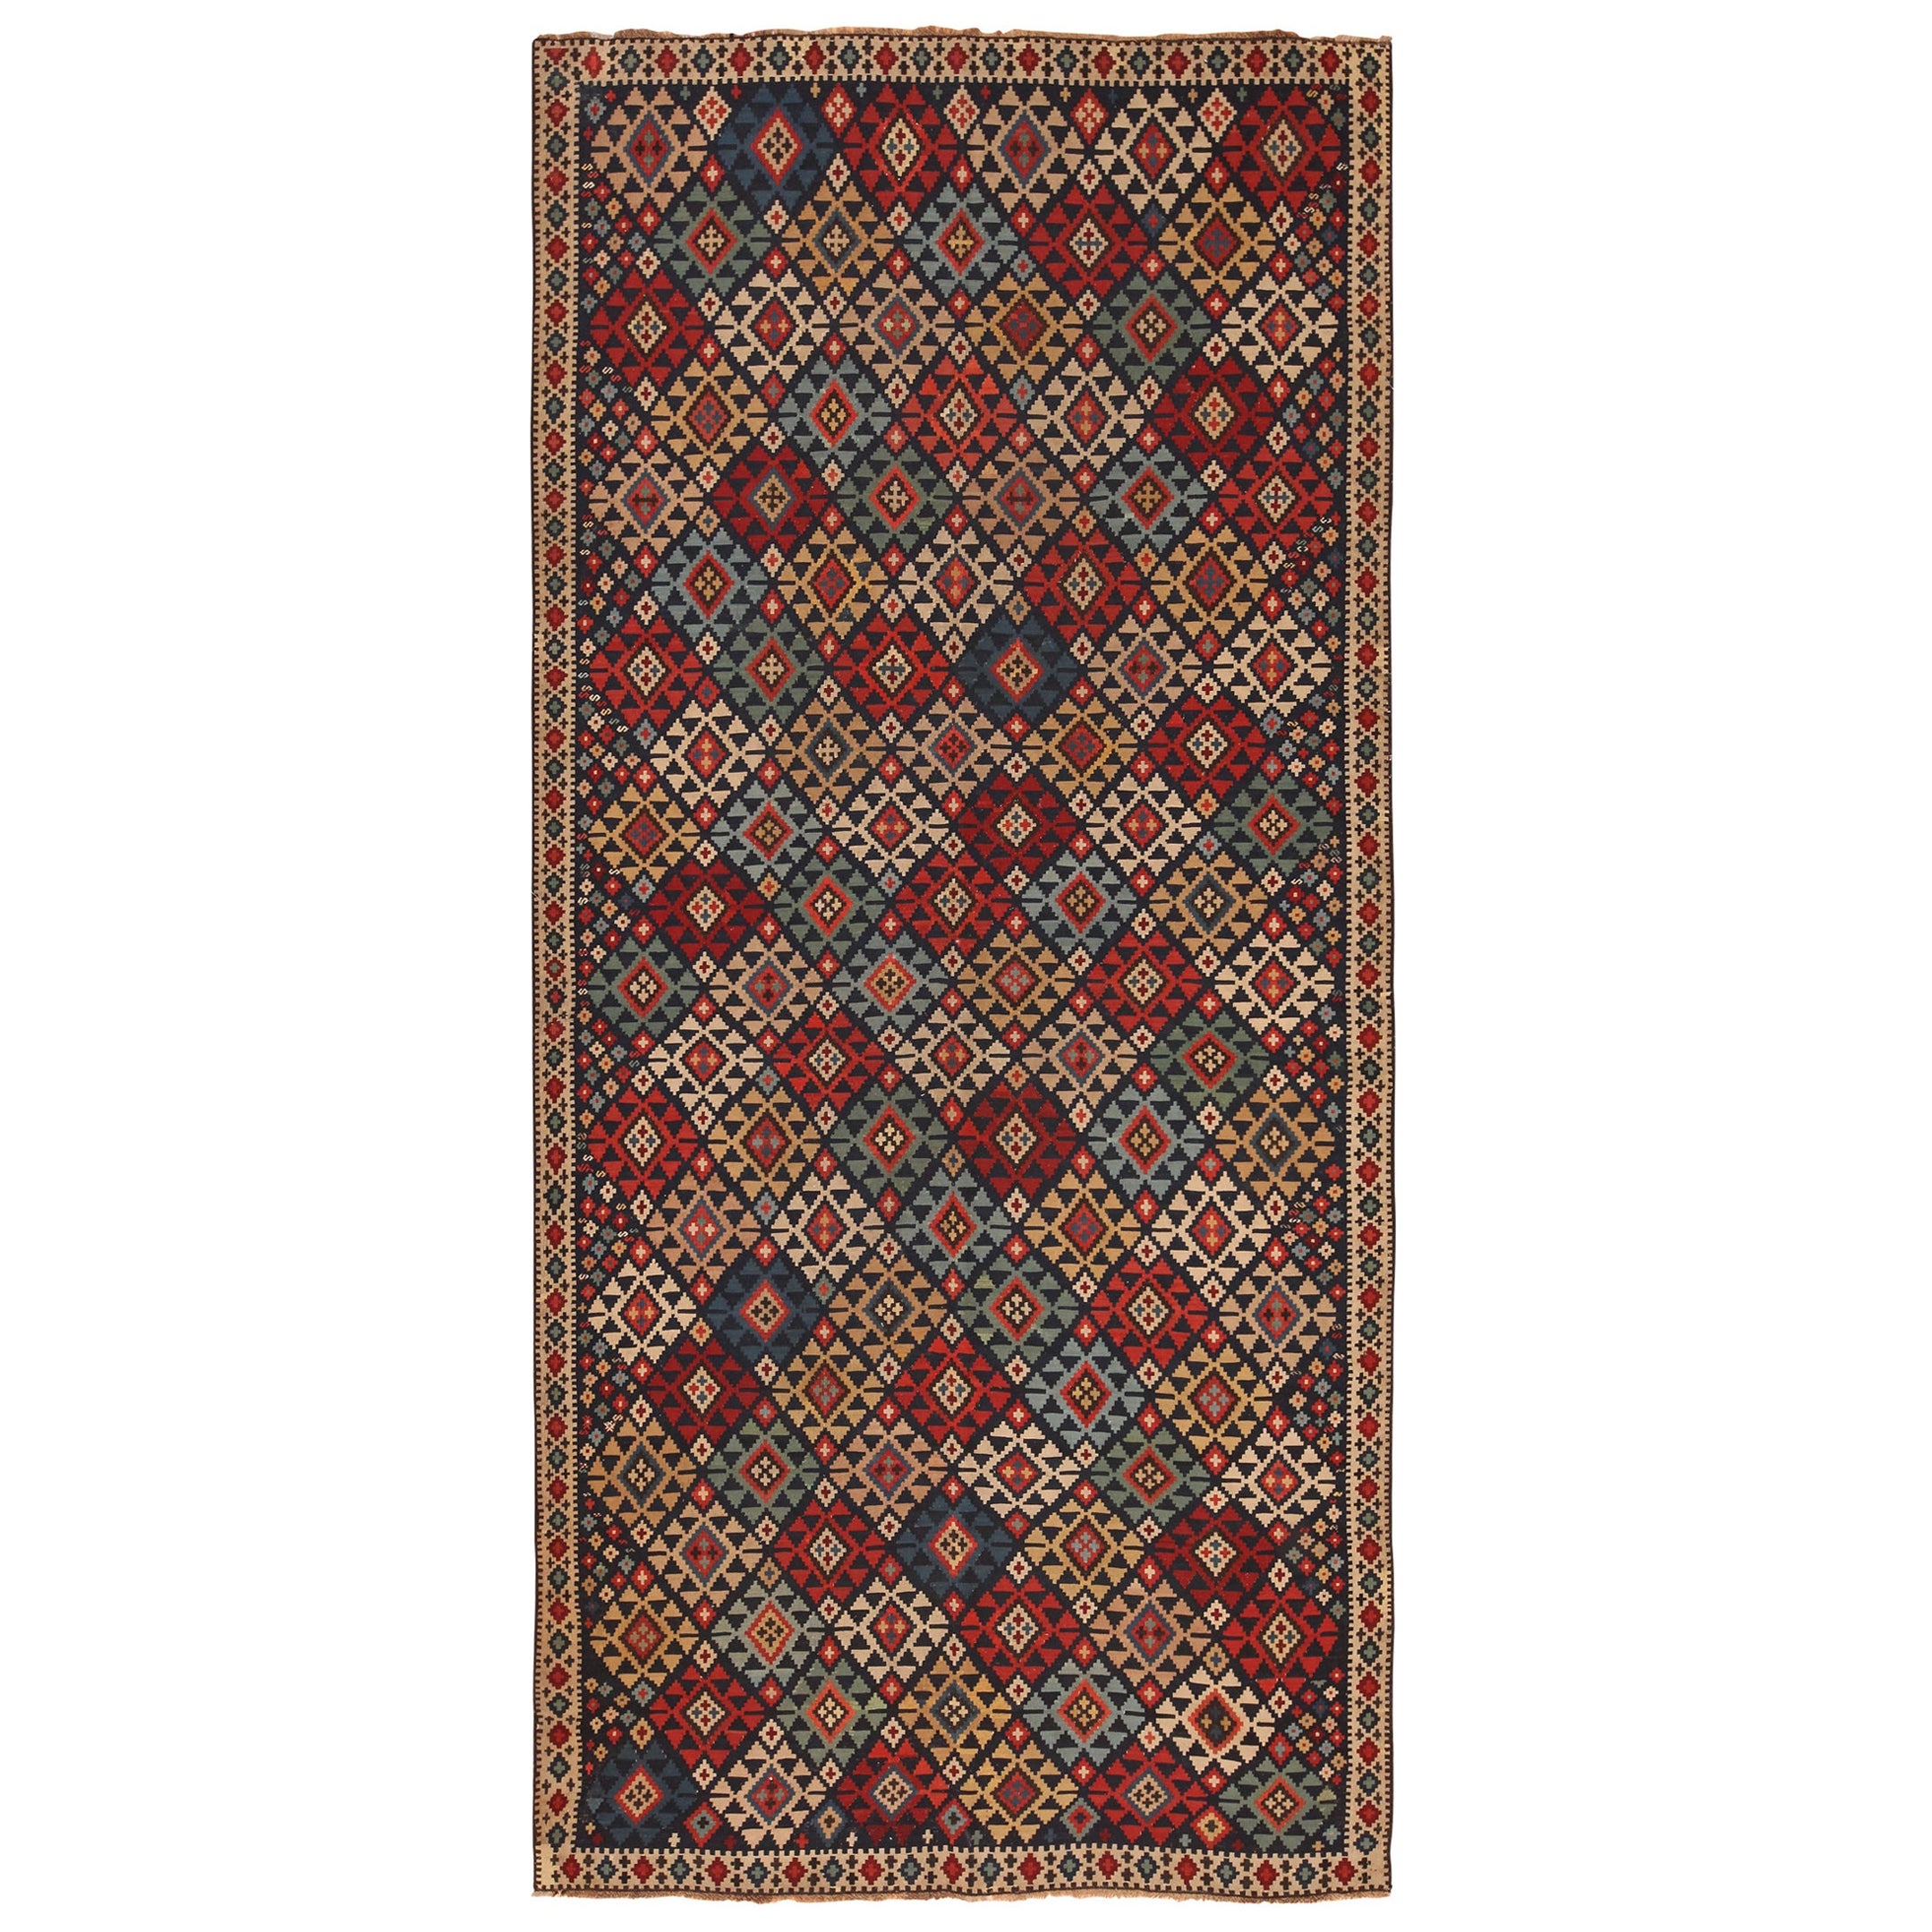 What is a Shirvan Rug?